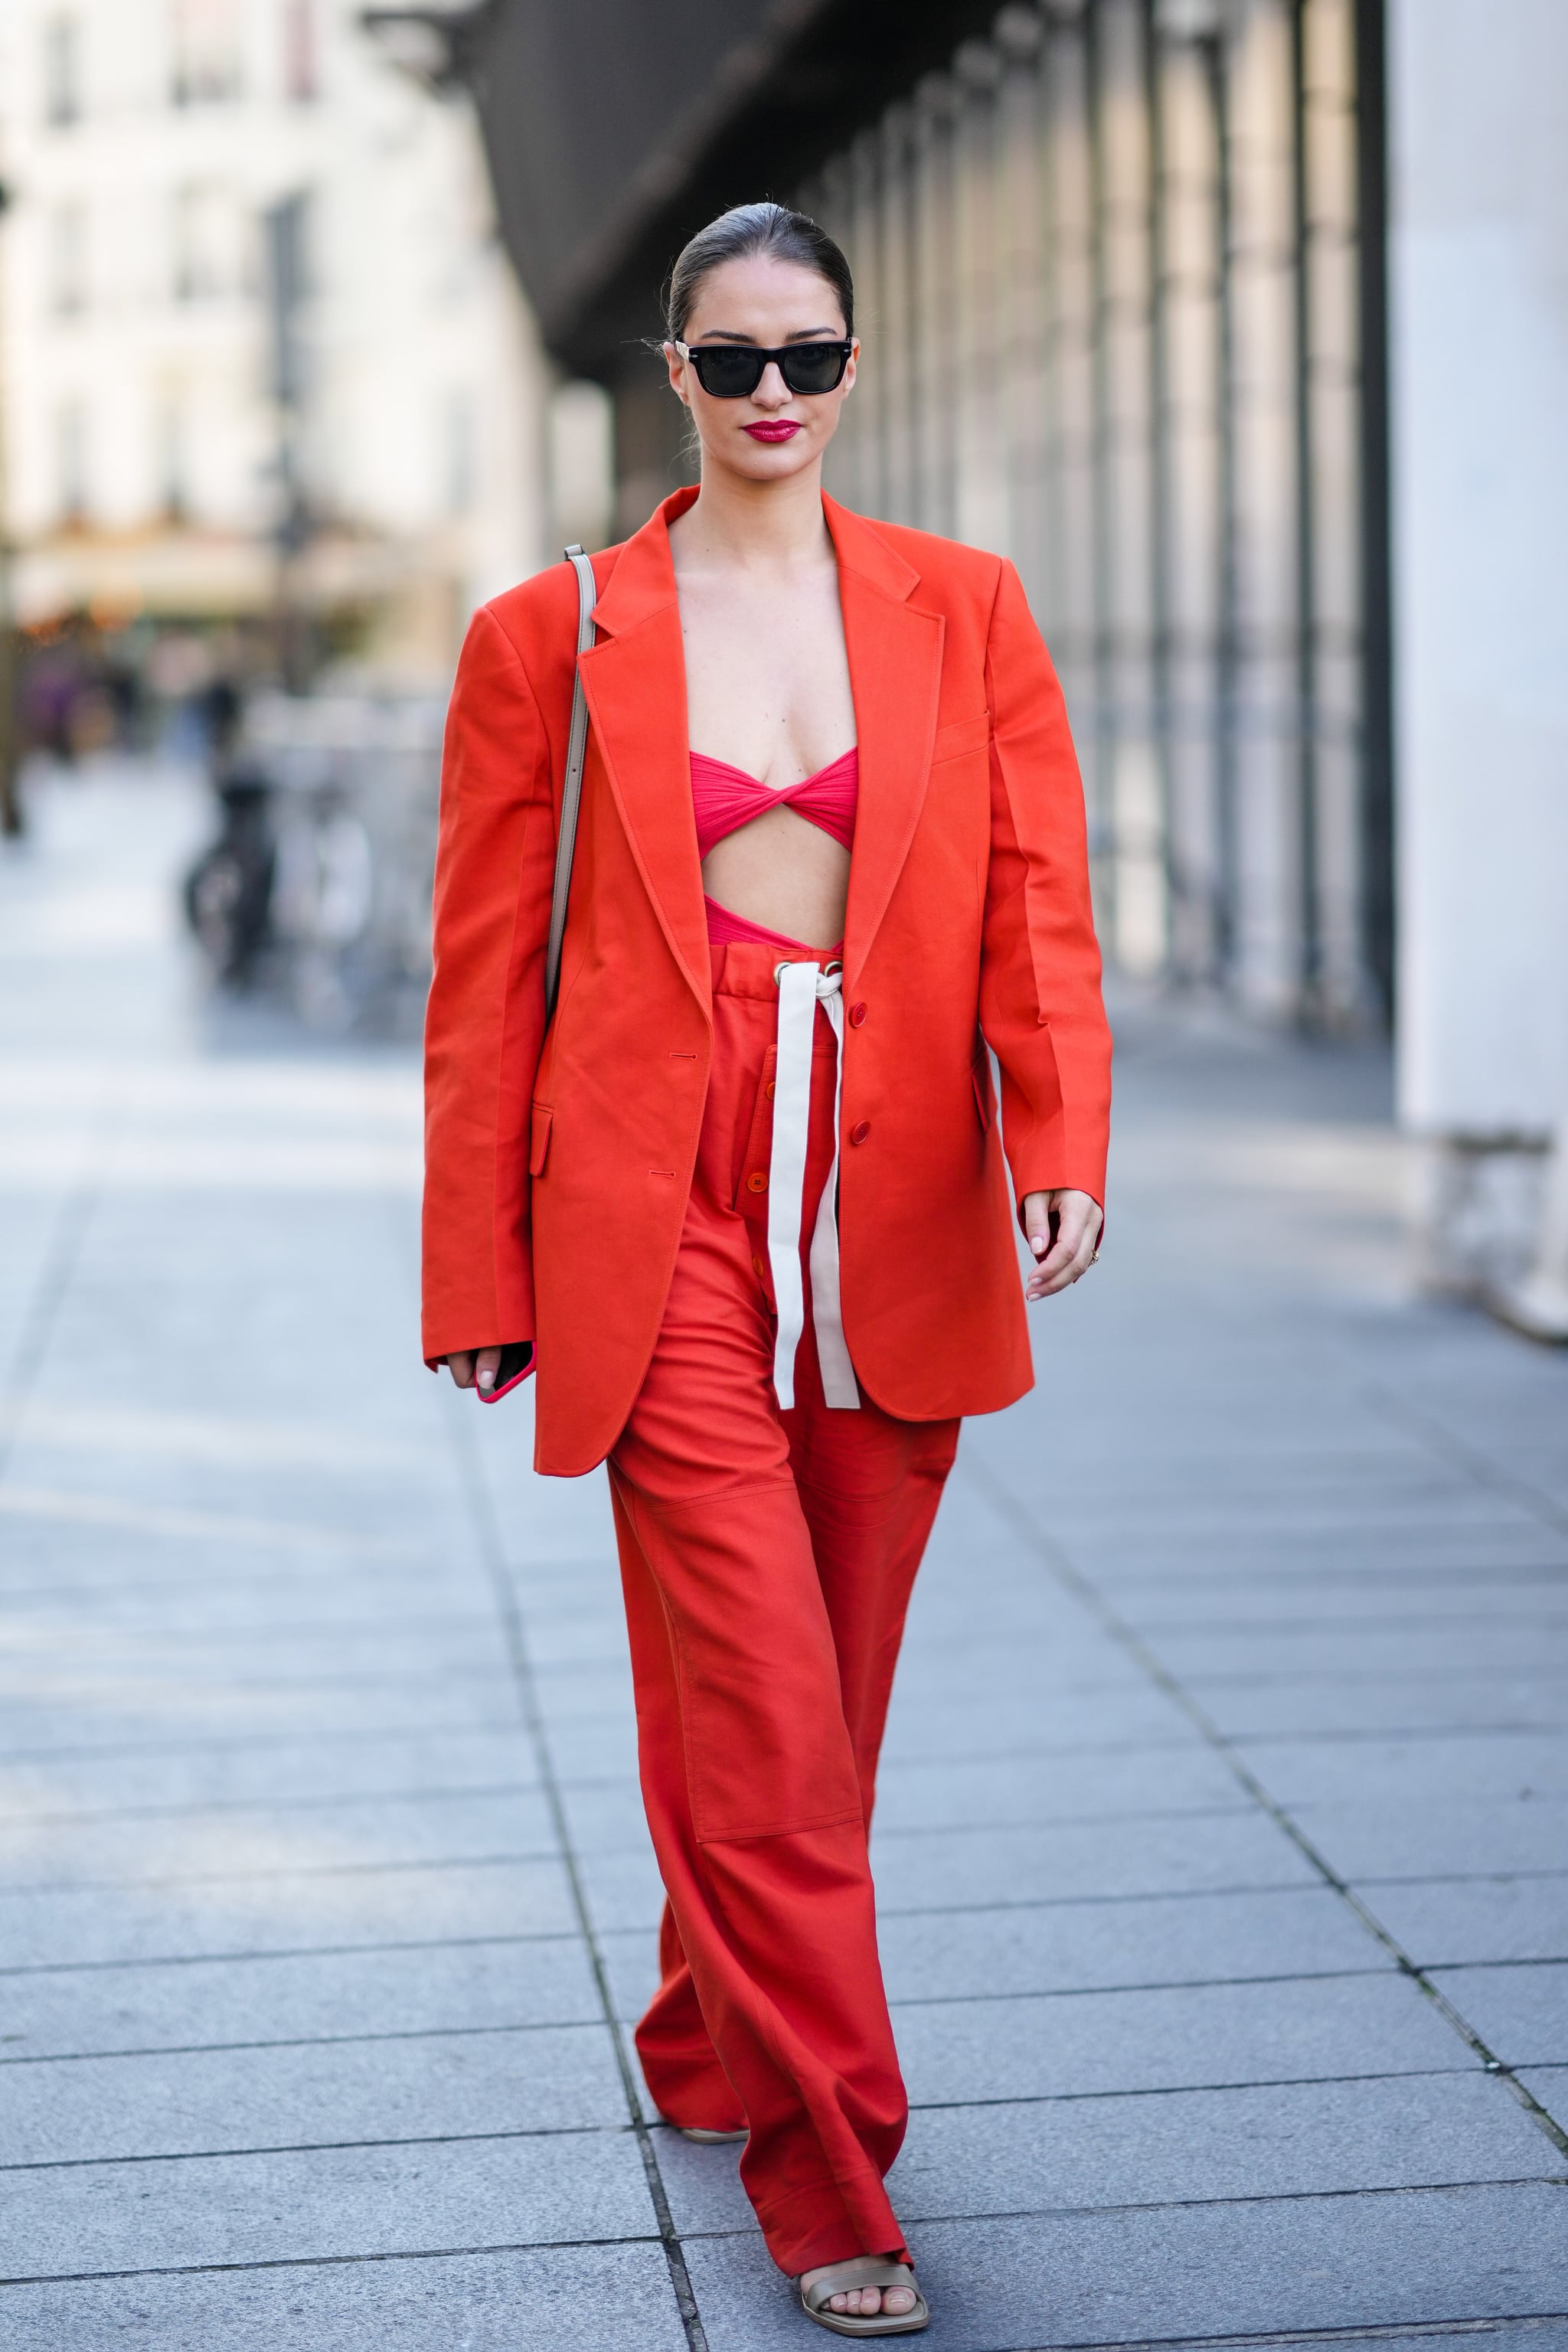 July 4 Outfit Idea: All Red | 21 Chic but Subtle Ways to Wear Red, White,  and Blue on July 4 | POPSUGAR Fashion Photo 11